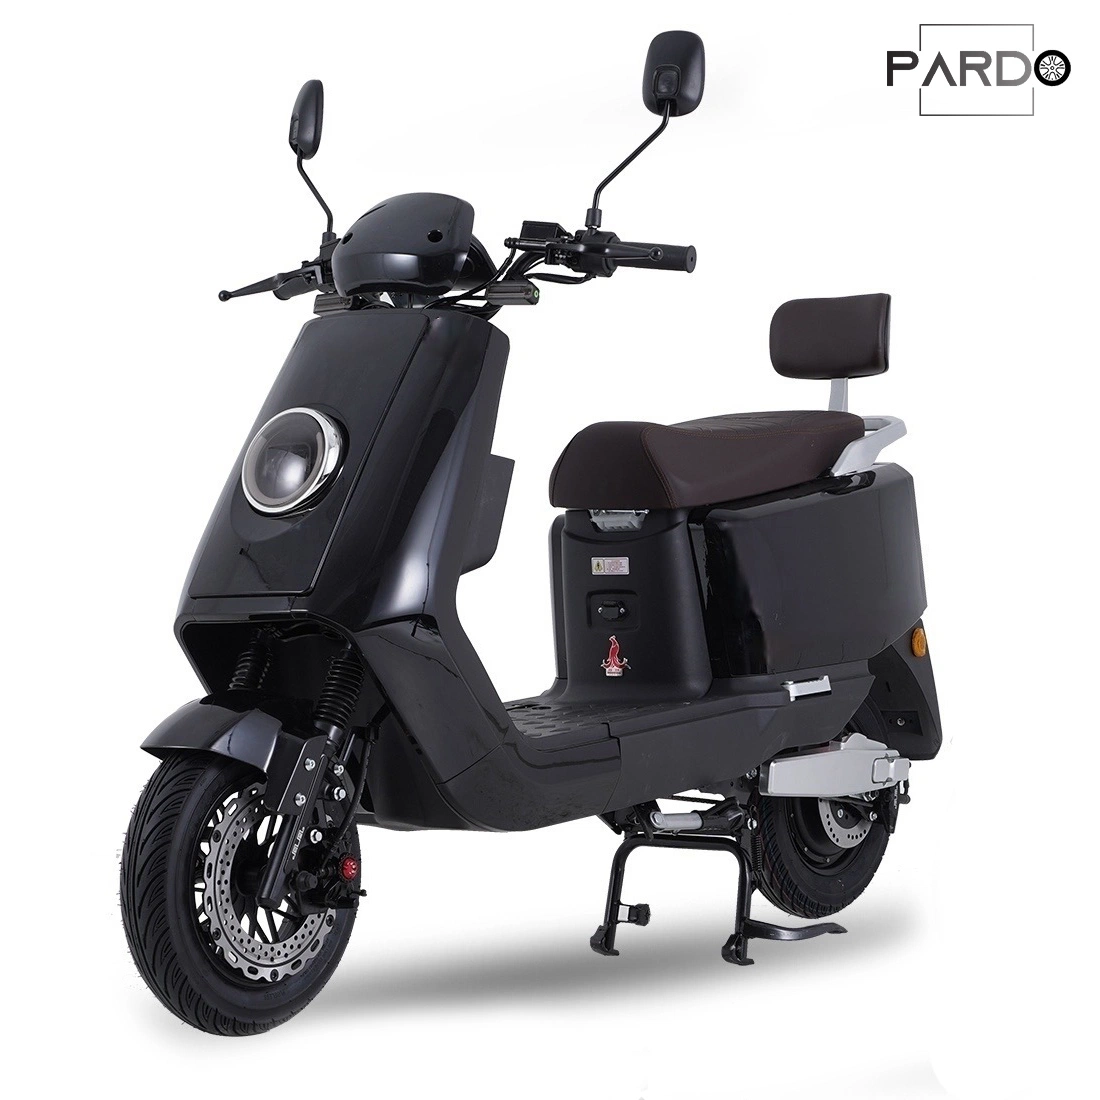 Pardo Xkn High Speed E-Bicycle with Stylish Design and Lead Acid Battery